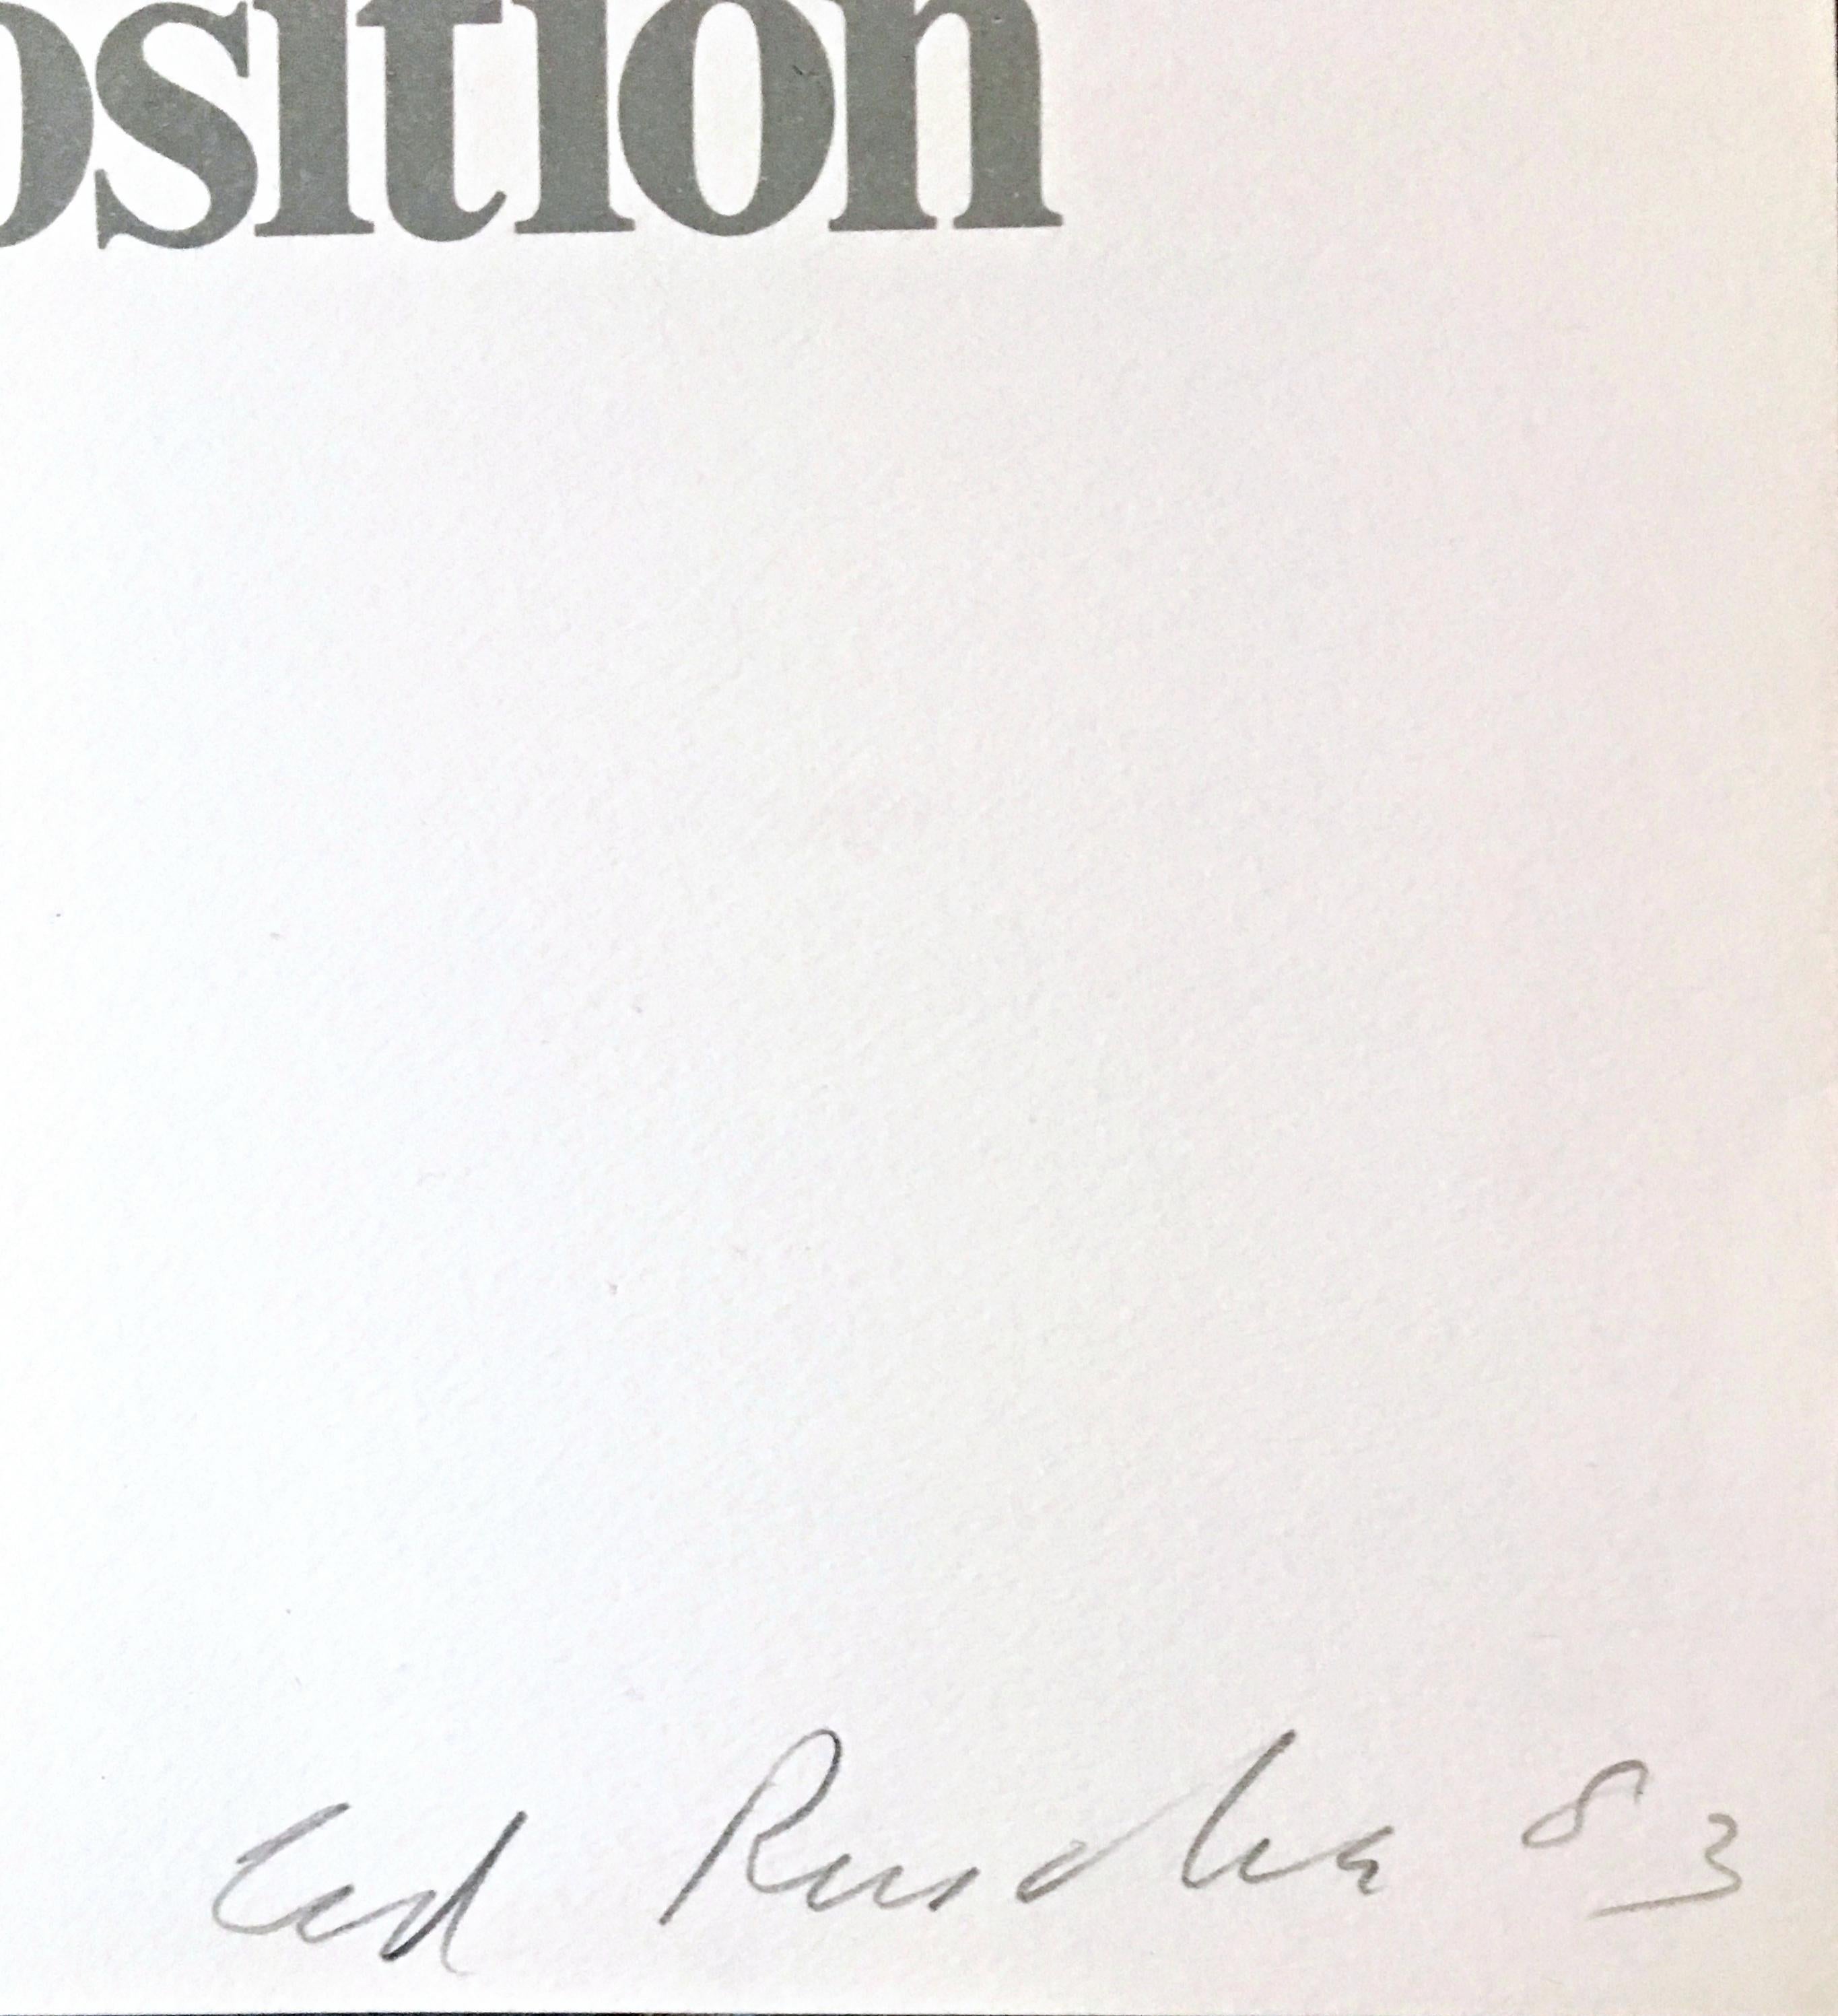 Ed Ruscha
Chicago International Art Exposition (Hand Signed by Ed Ruscha), 1983
Offset Lithograph. Pencil Signed and dated. Unframed.
Signed and dated by Ed Ruscha in graphite pencil lower right.
39 × 27 1/2 inches
Unframed
This vintage hand signed